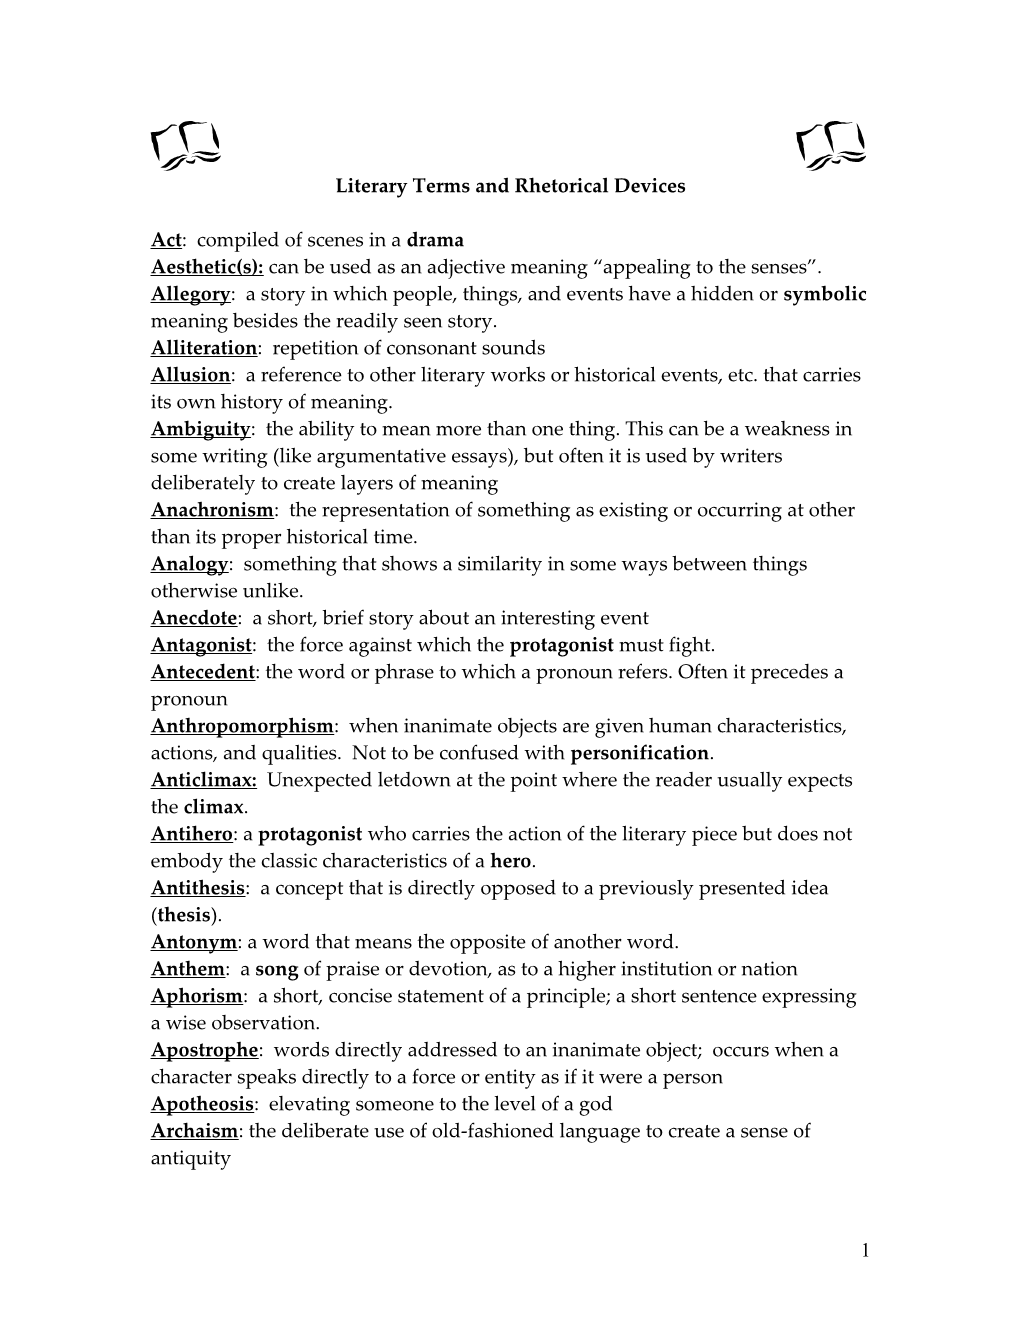 Literary Terms and Rhetorical Devices